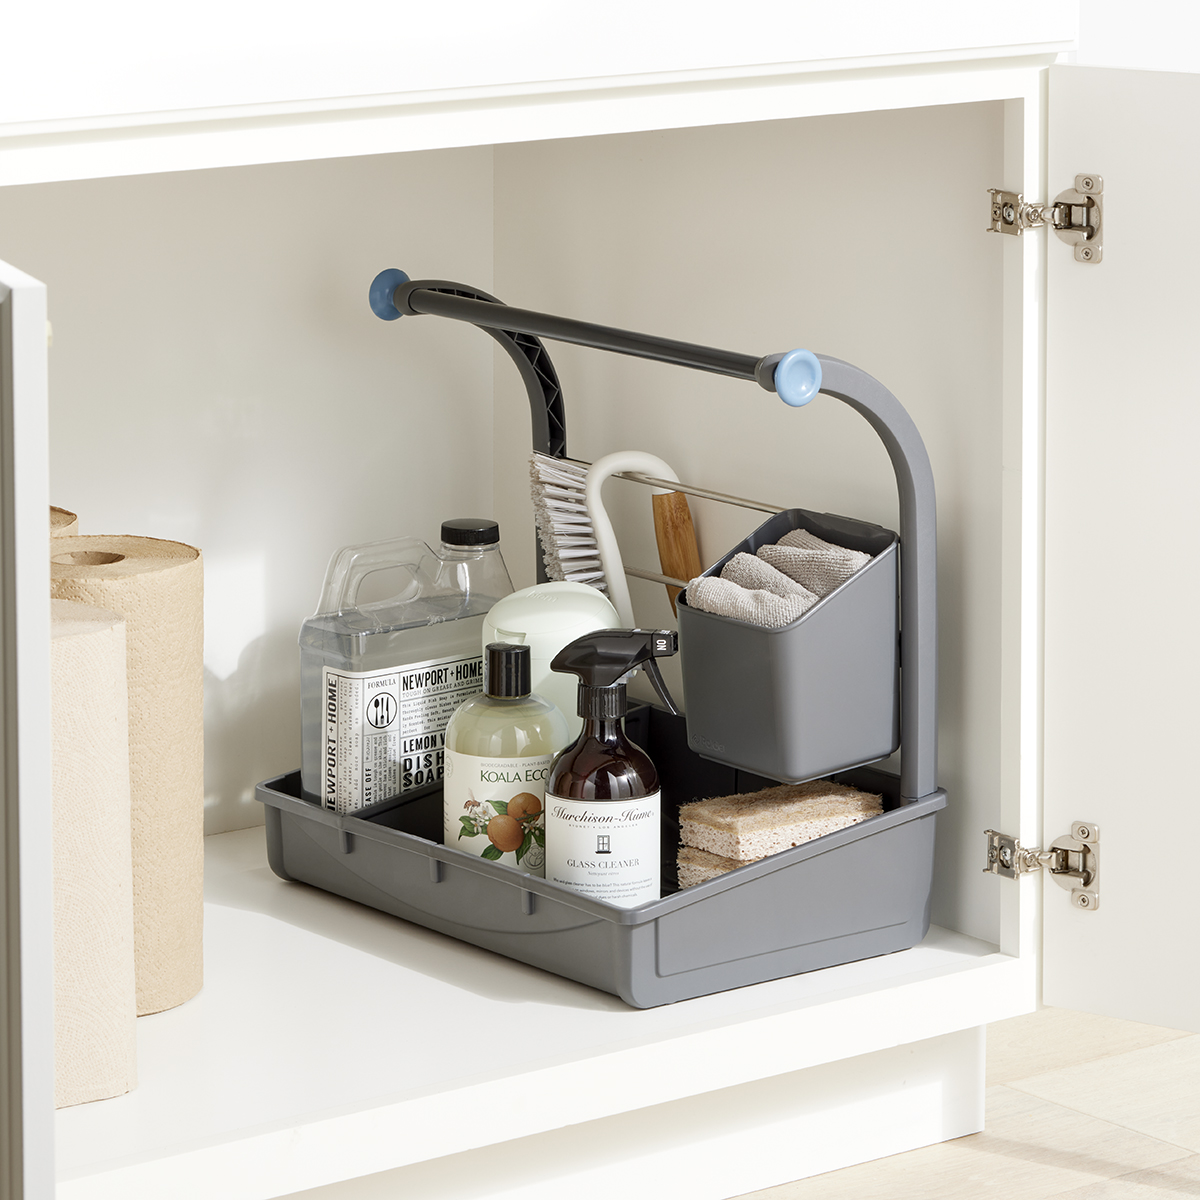 https://www.containerstore.com/catalogimages/521559/JDM-23-youcopia-cleaning-v3.jpg